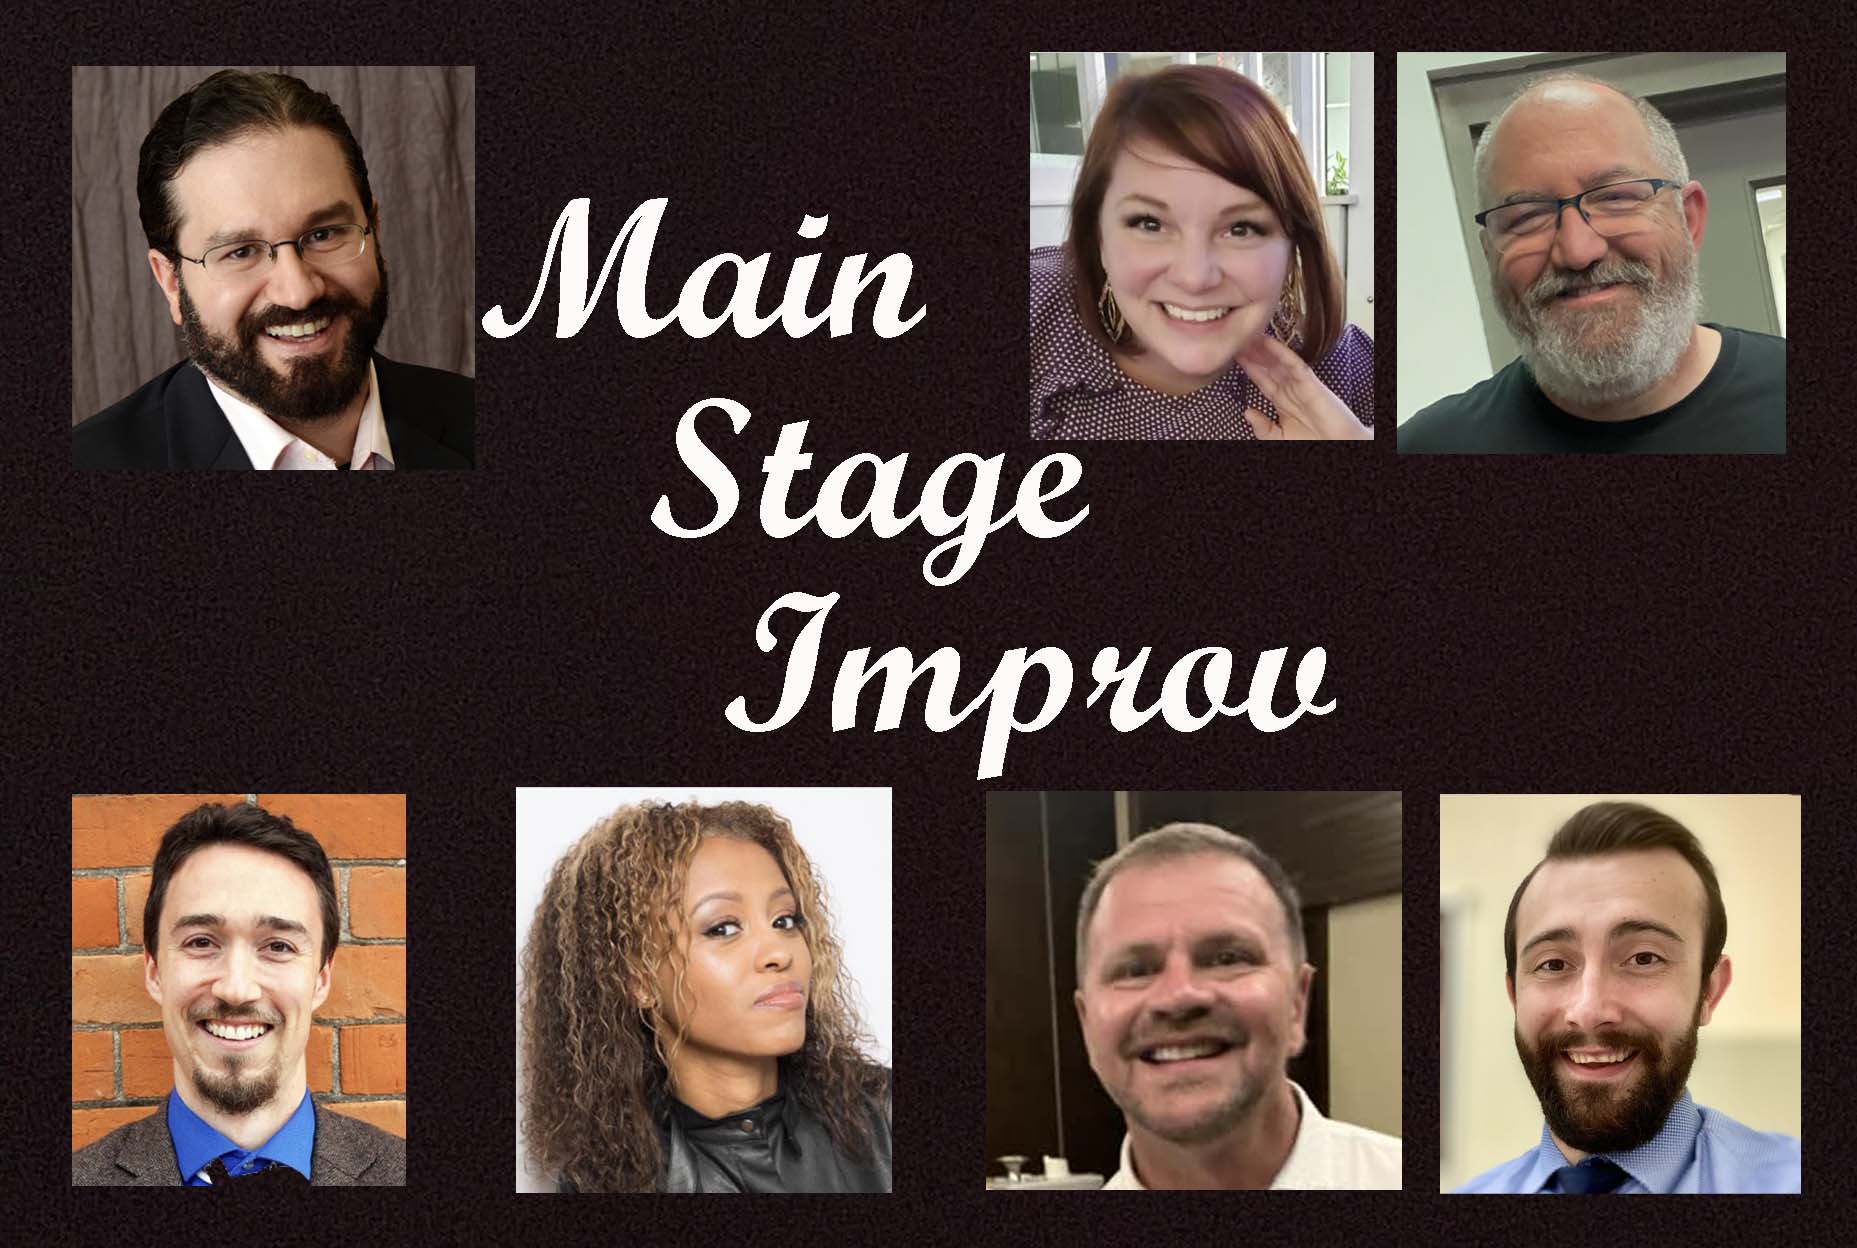 Main Stage Improv group. Headshots with the name Main Stage Improv and a dark backgroun